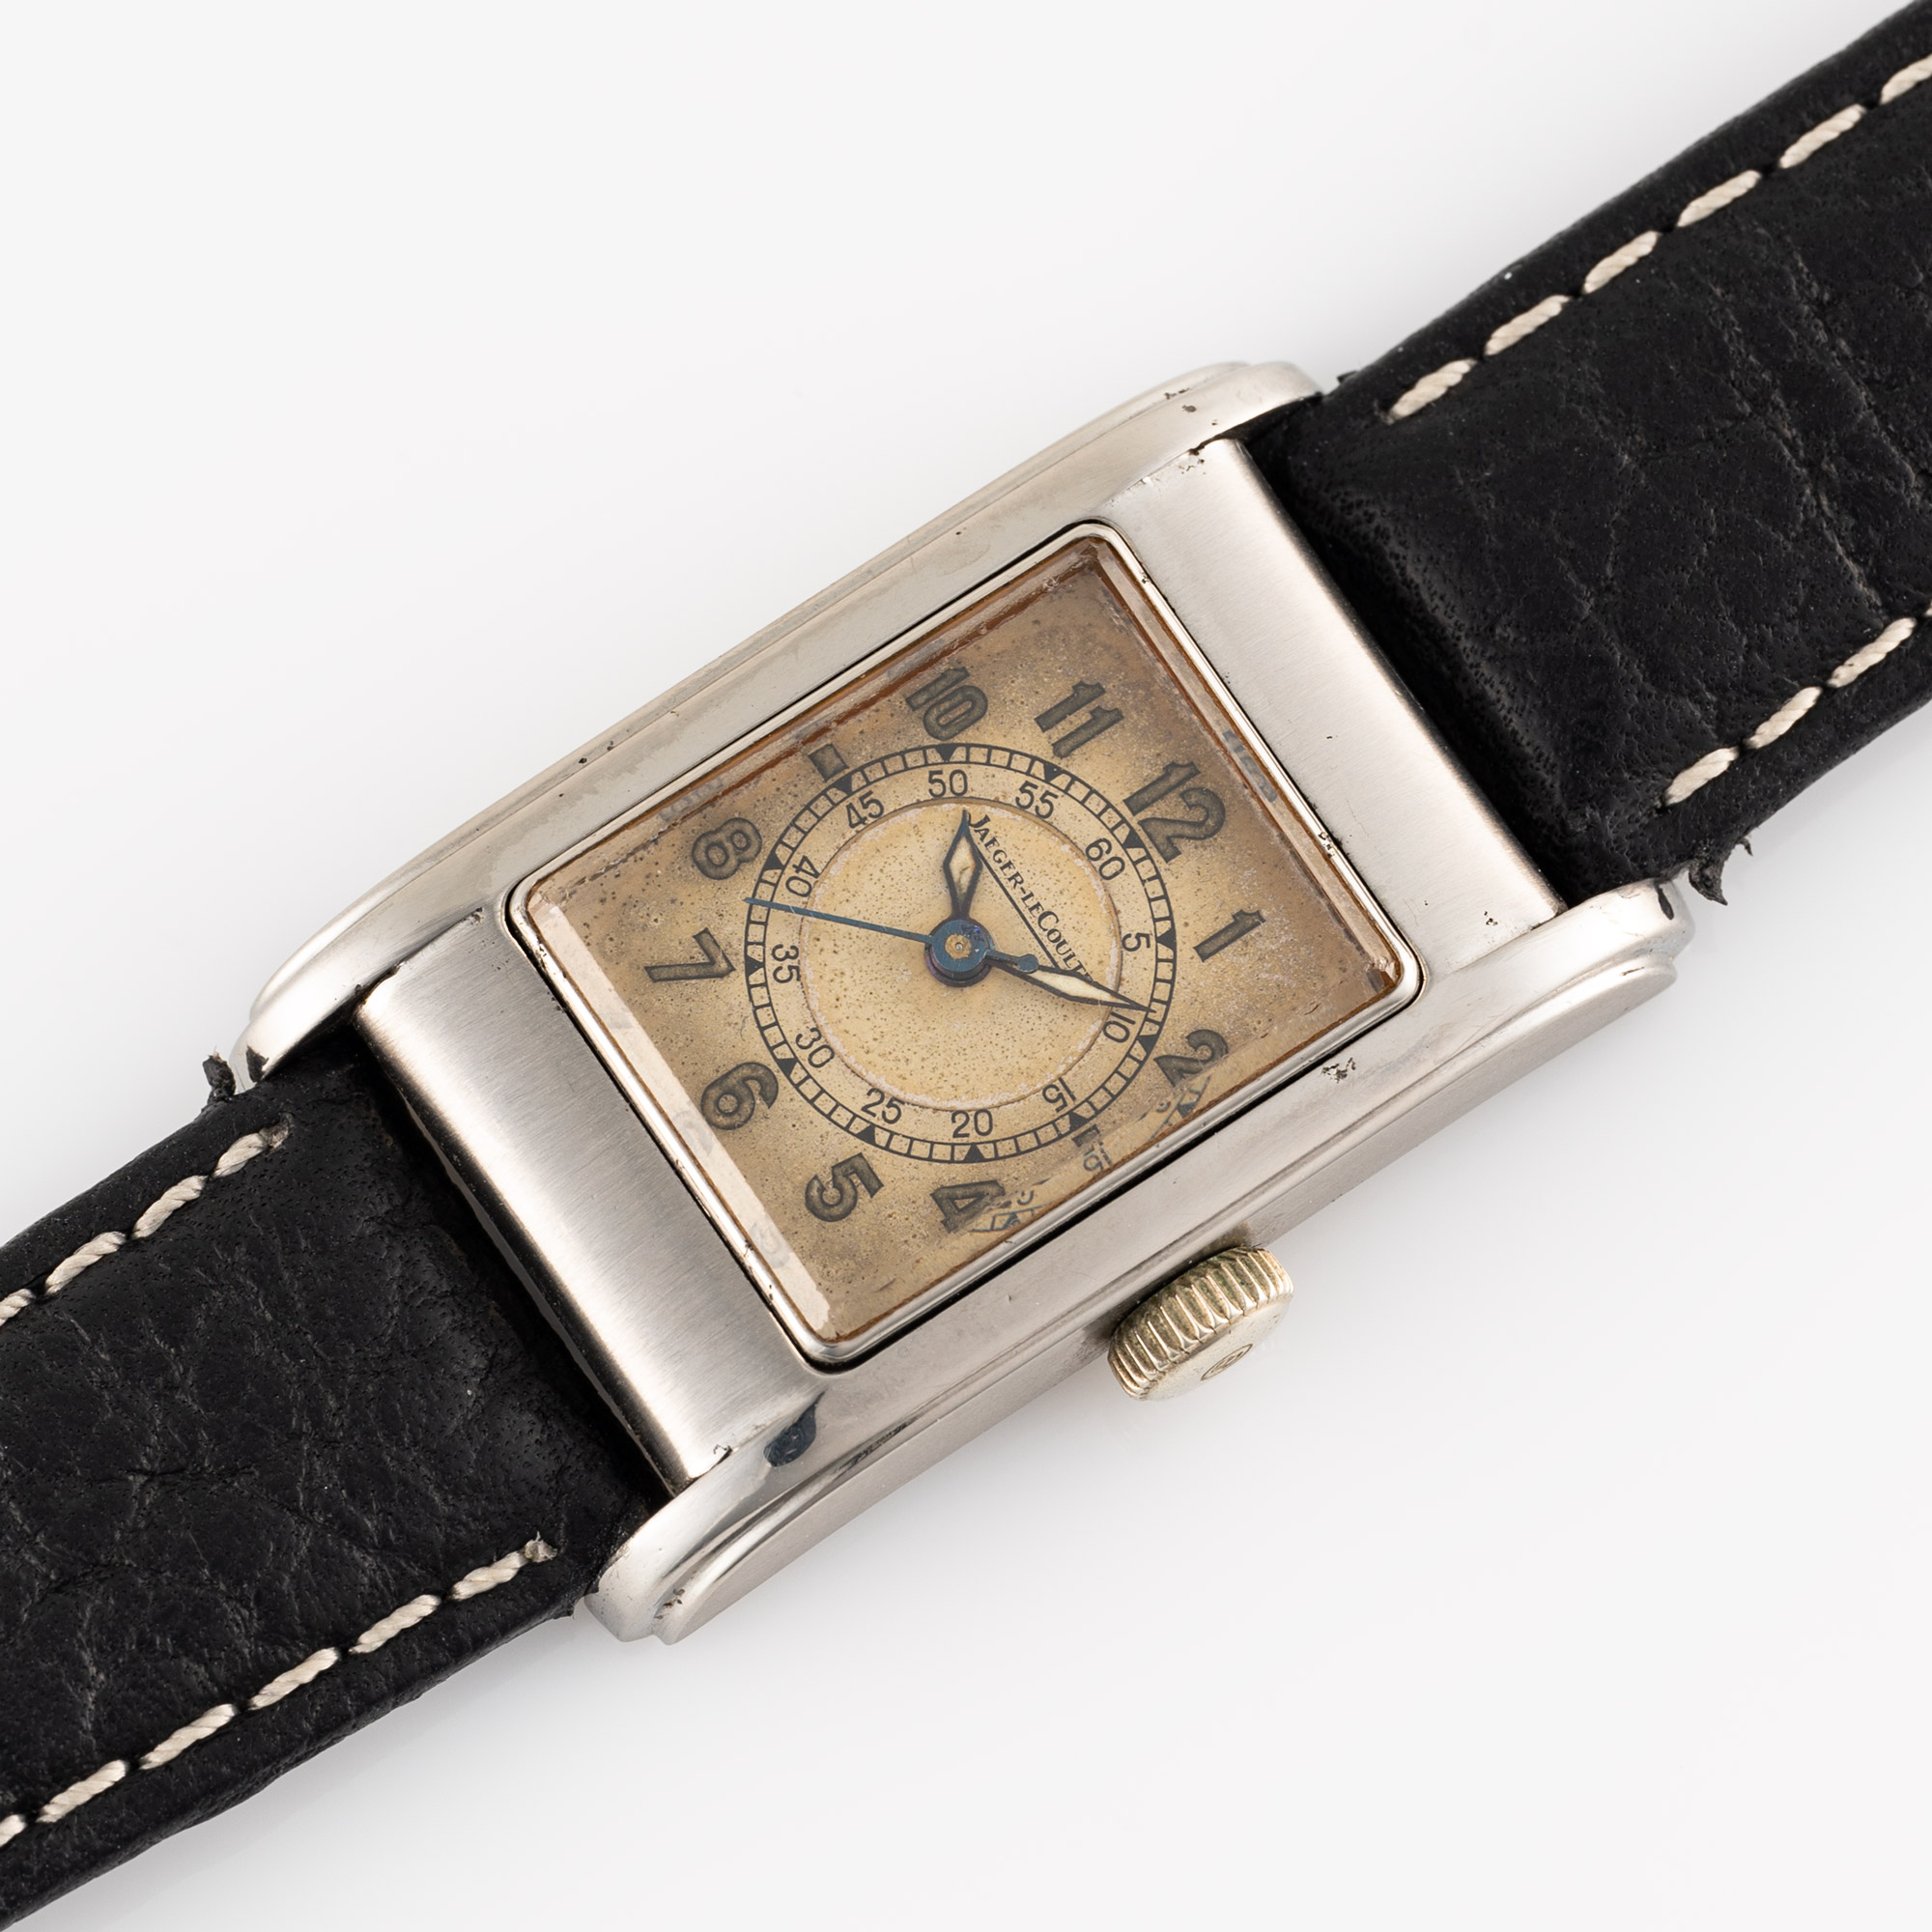 A GENTLEMAN'S SIZE STAINLESS STEEL JAEGER LECOULTRE ETANCHE WRIST WATCH CIRCA 1930s EARLY PATENTED - Image 3 of 7